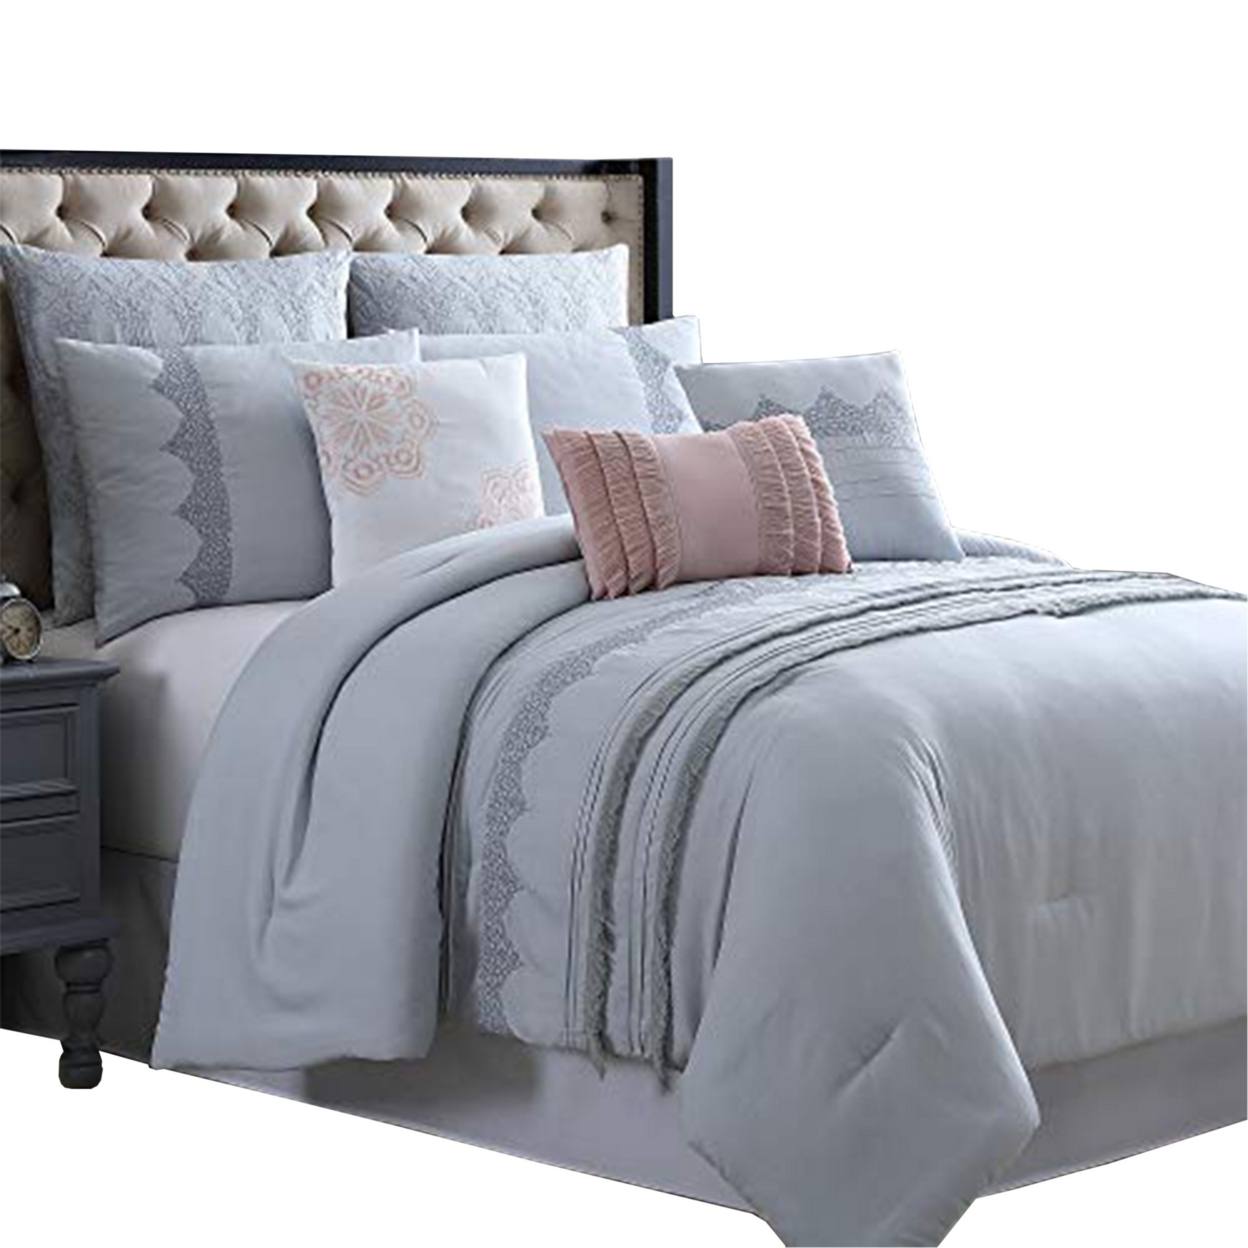 Valletta 8 Piece King Comforter Set With Embroidery And Pleats The Urban Port, Gray- Saltoro Sherpi